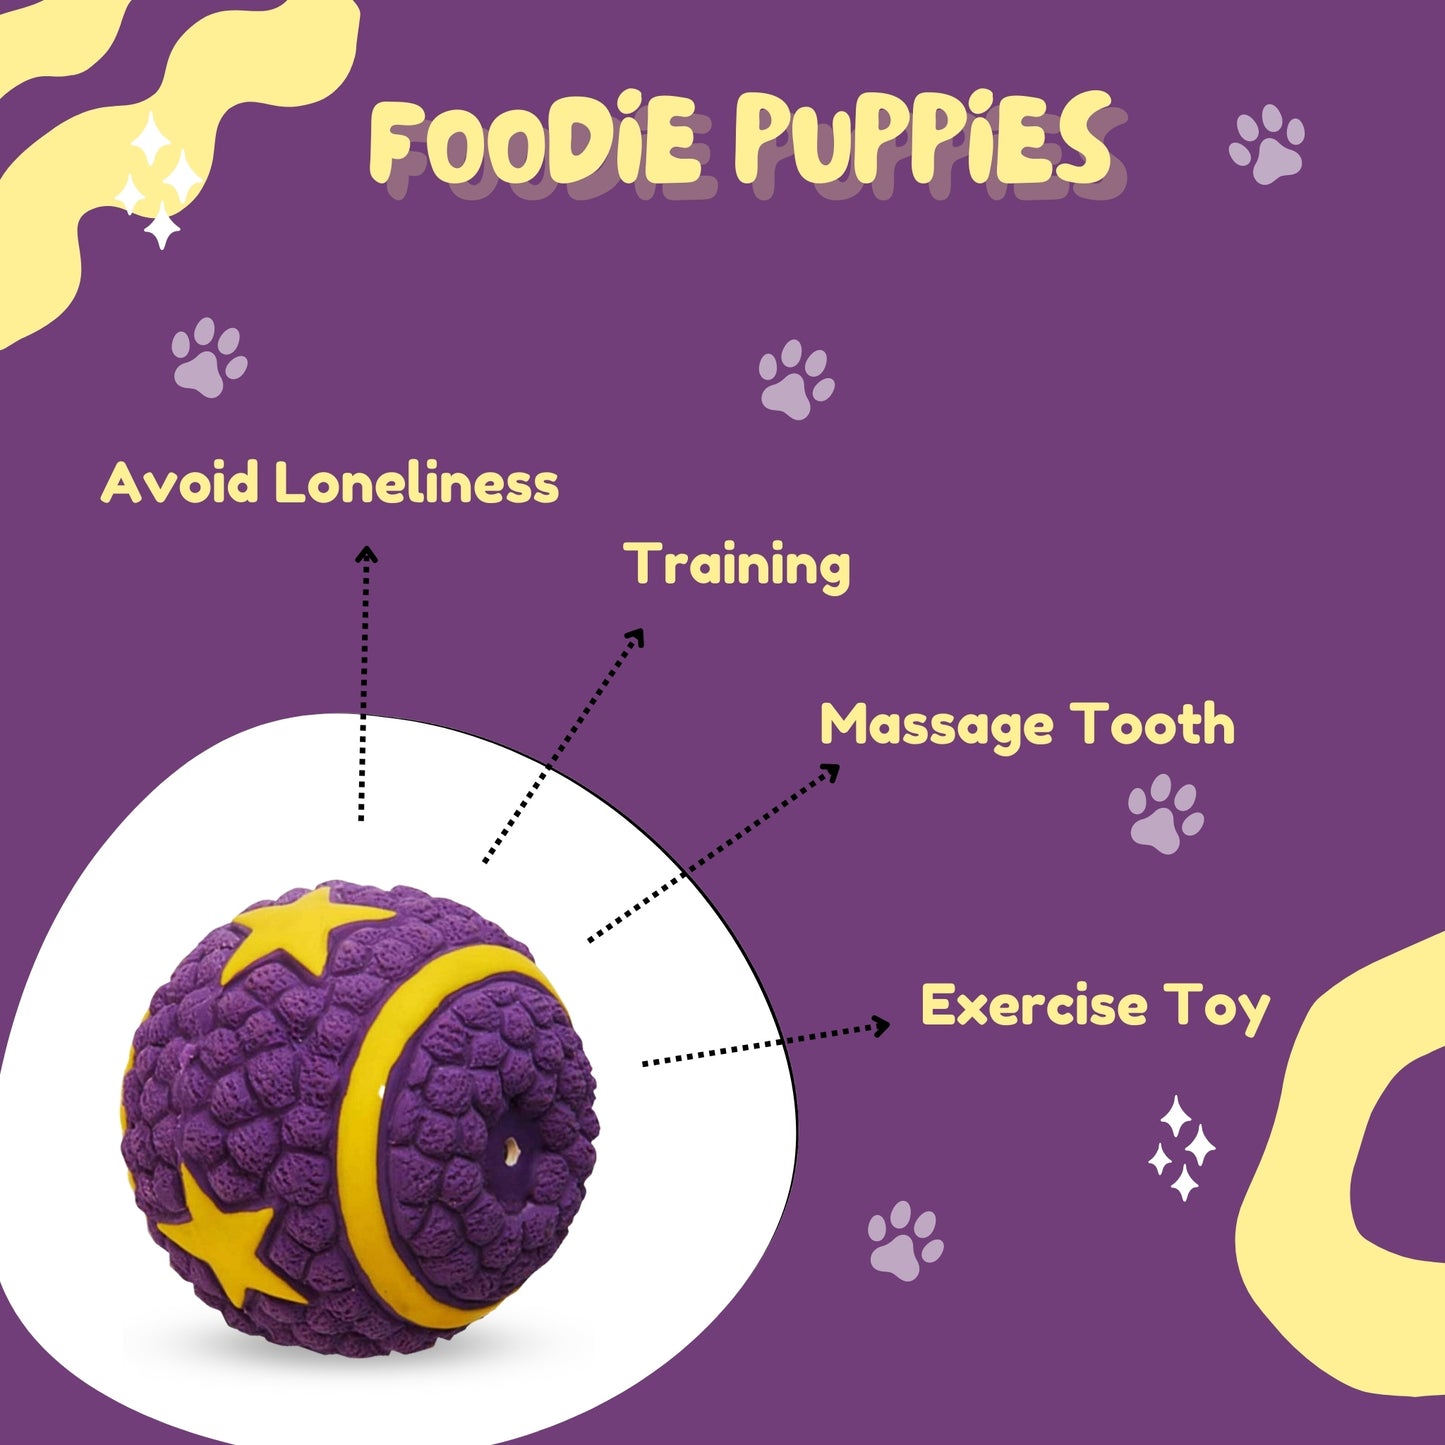 Foodie Puppies Latex Squeaky Toy for Medium Dog - Star Ball, Large